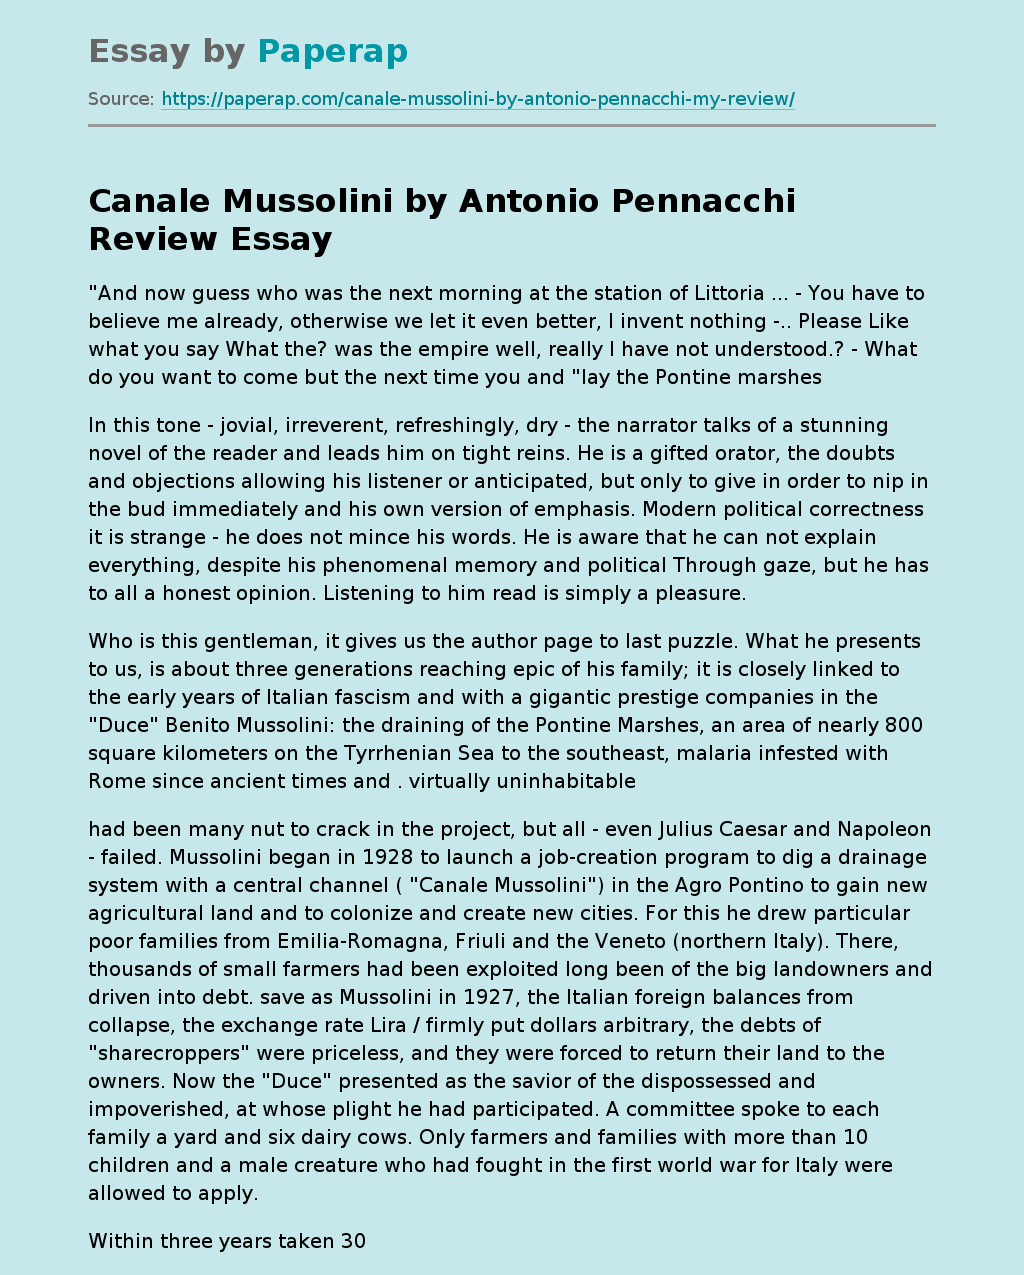 Canale Mussolini by Antonio Pennacchi Review